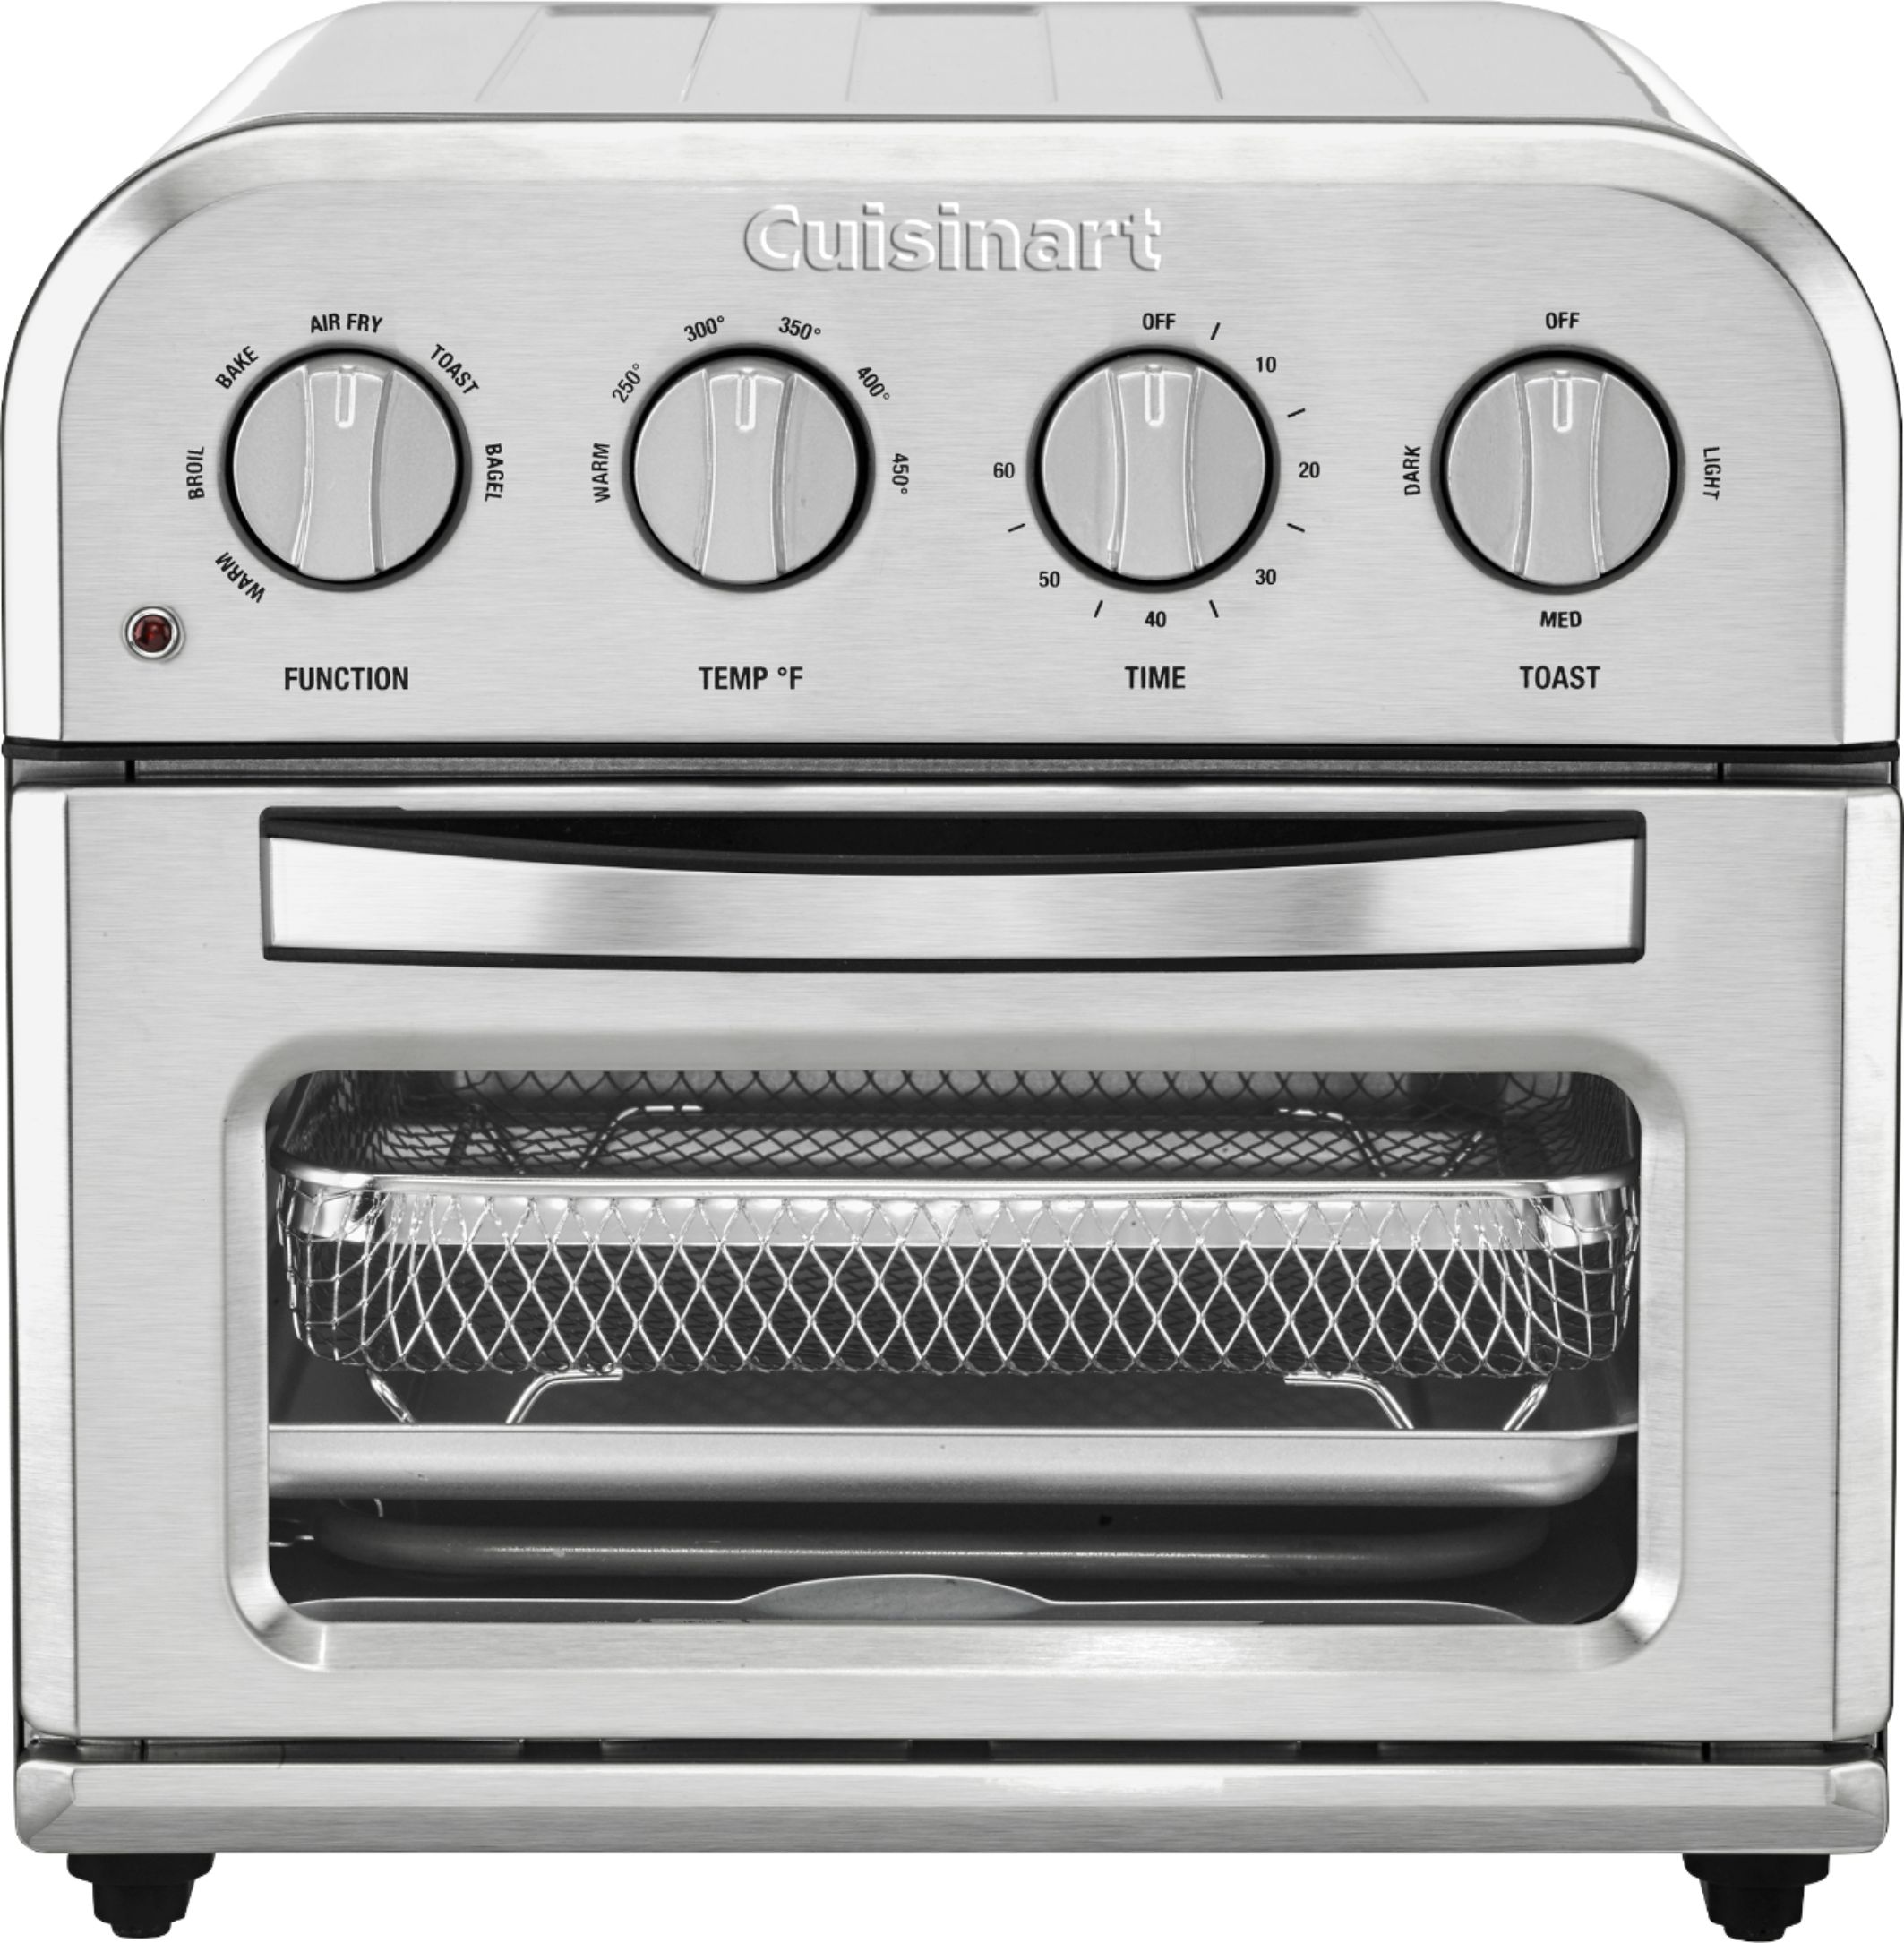 Toaster Oven With Air Fry, 4-Slice, Gray